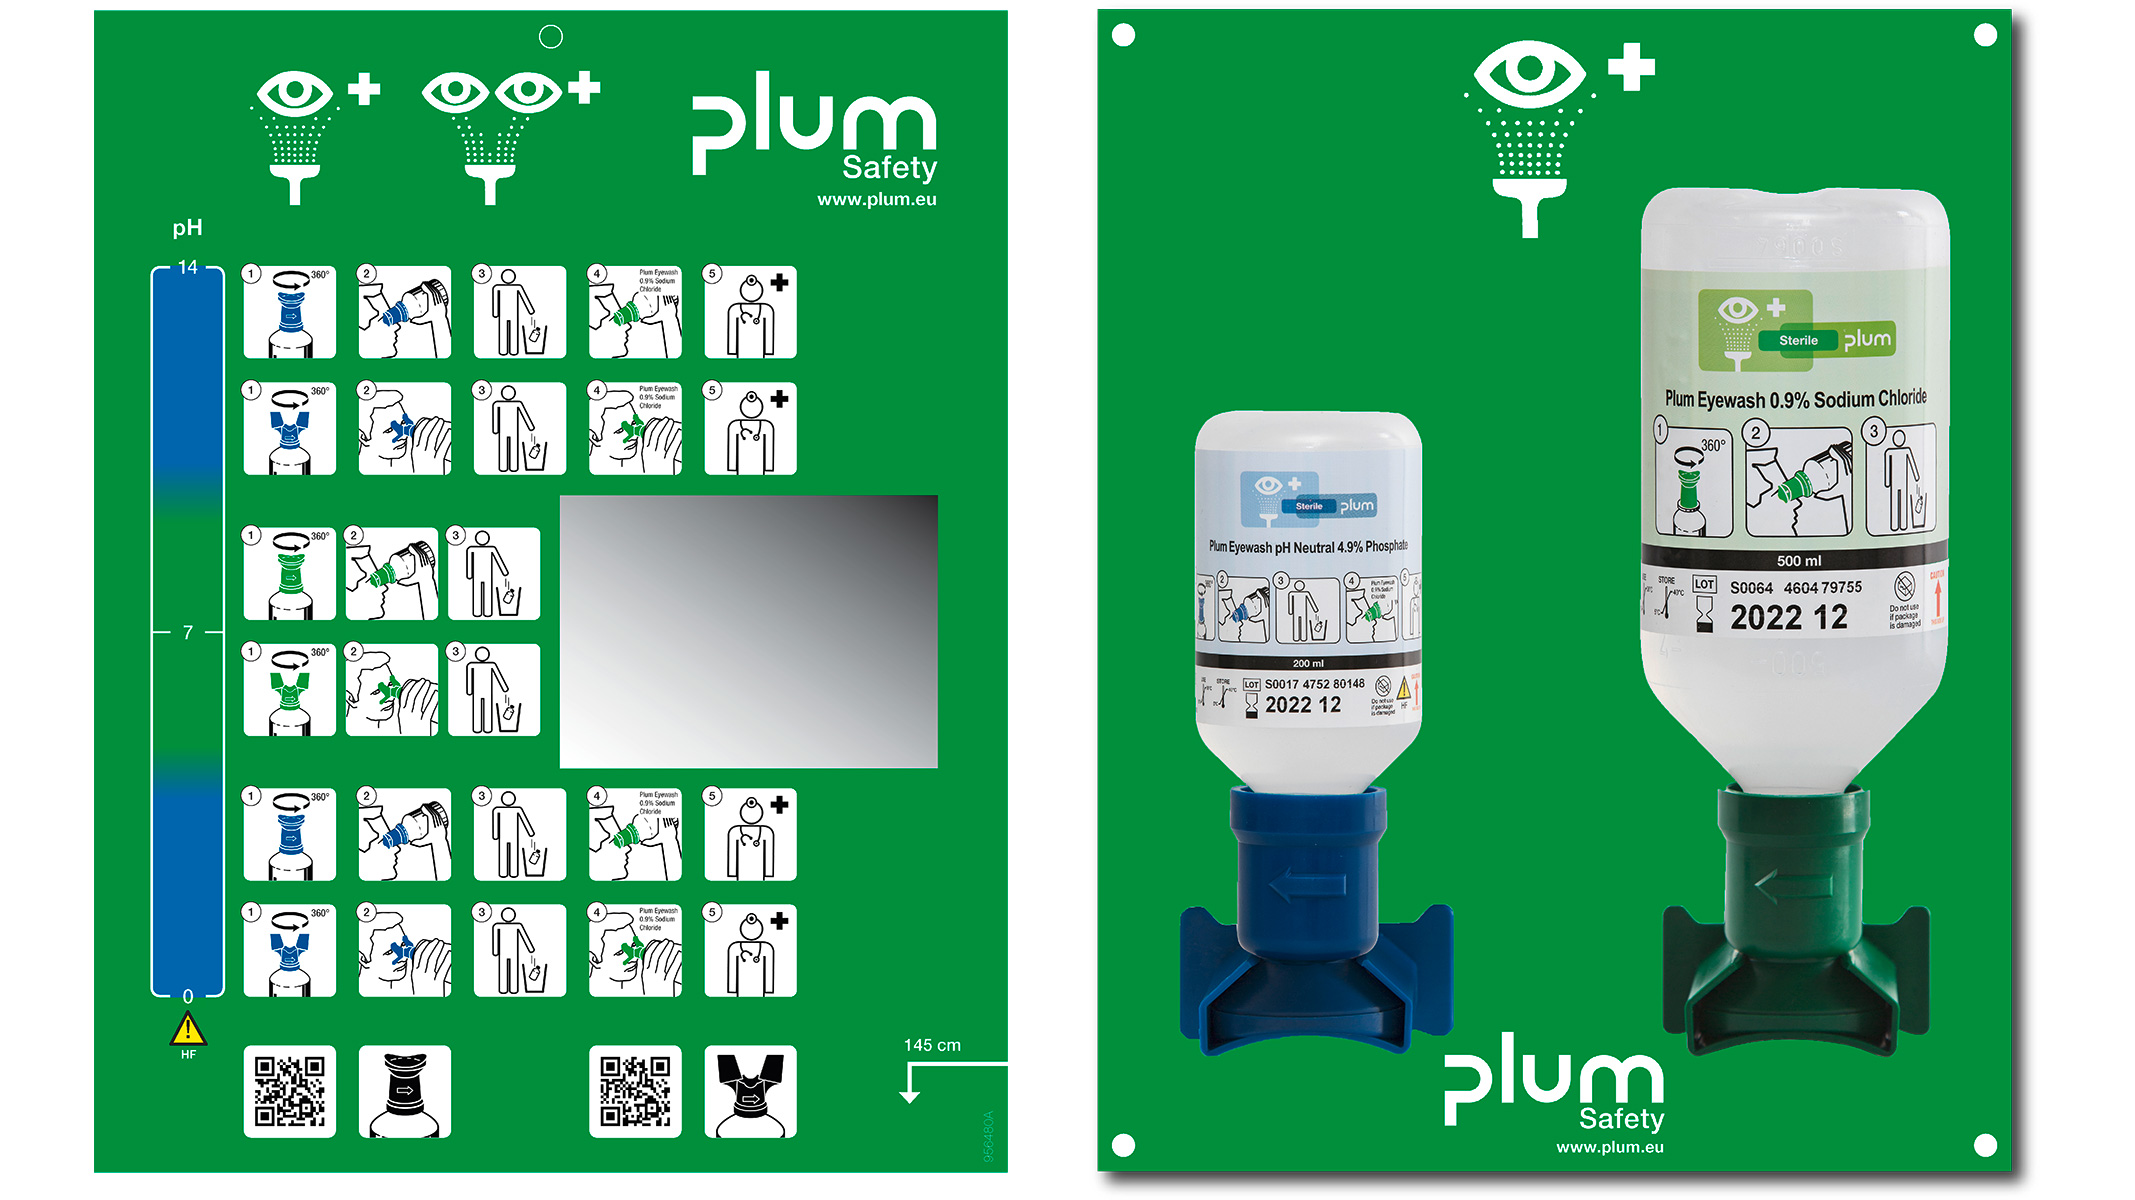 Plum combined eye wash station for accidents with acids or alkalis